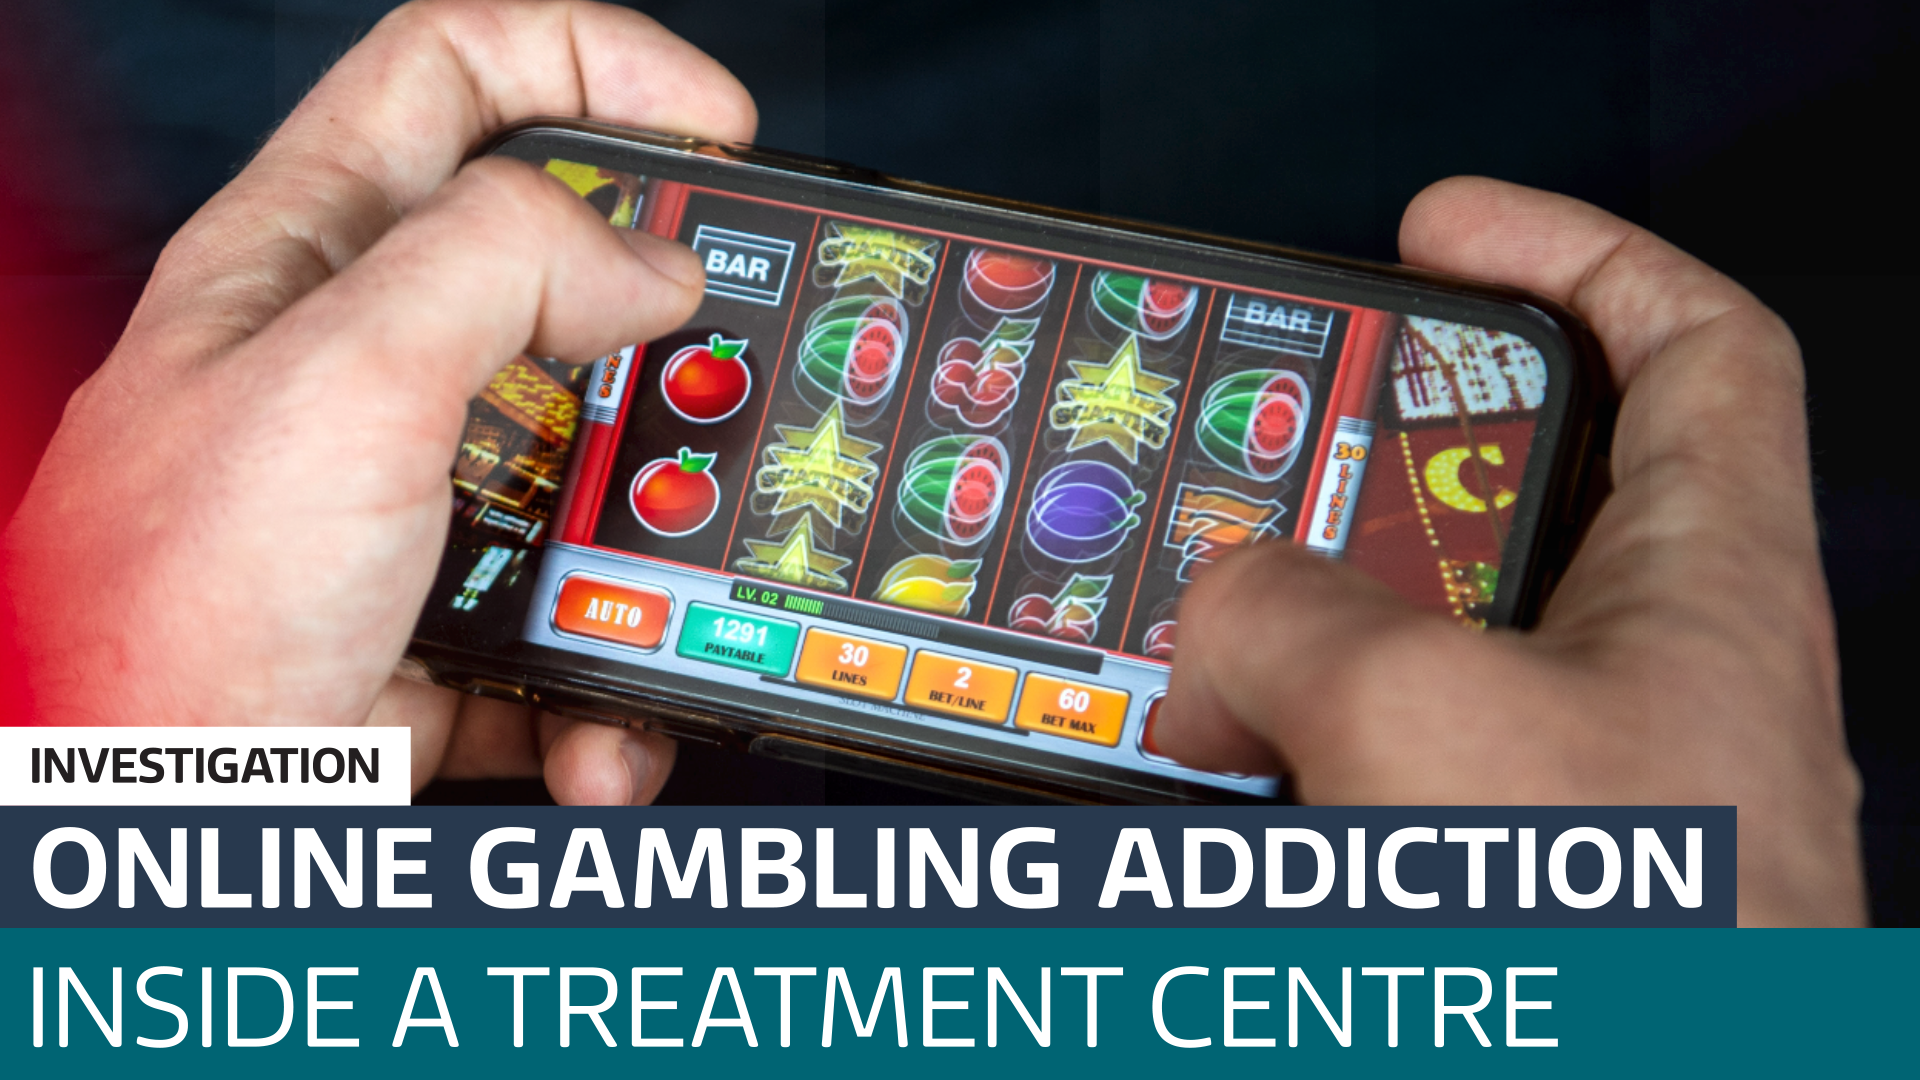 Rare insight into the UK’s growing problem of online gambling addiction – Latest From ITV News